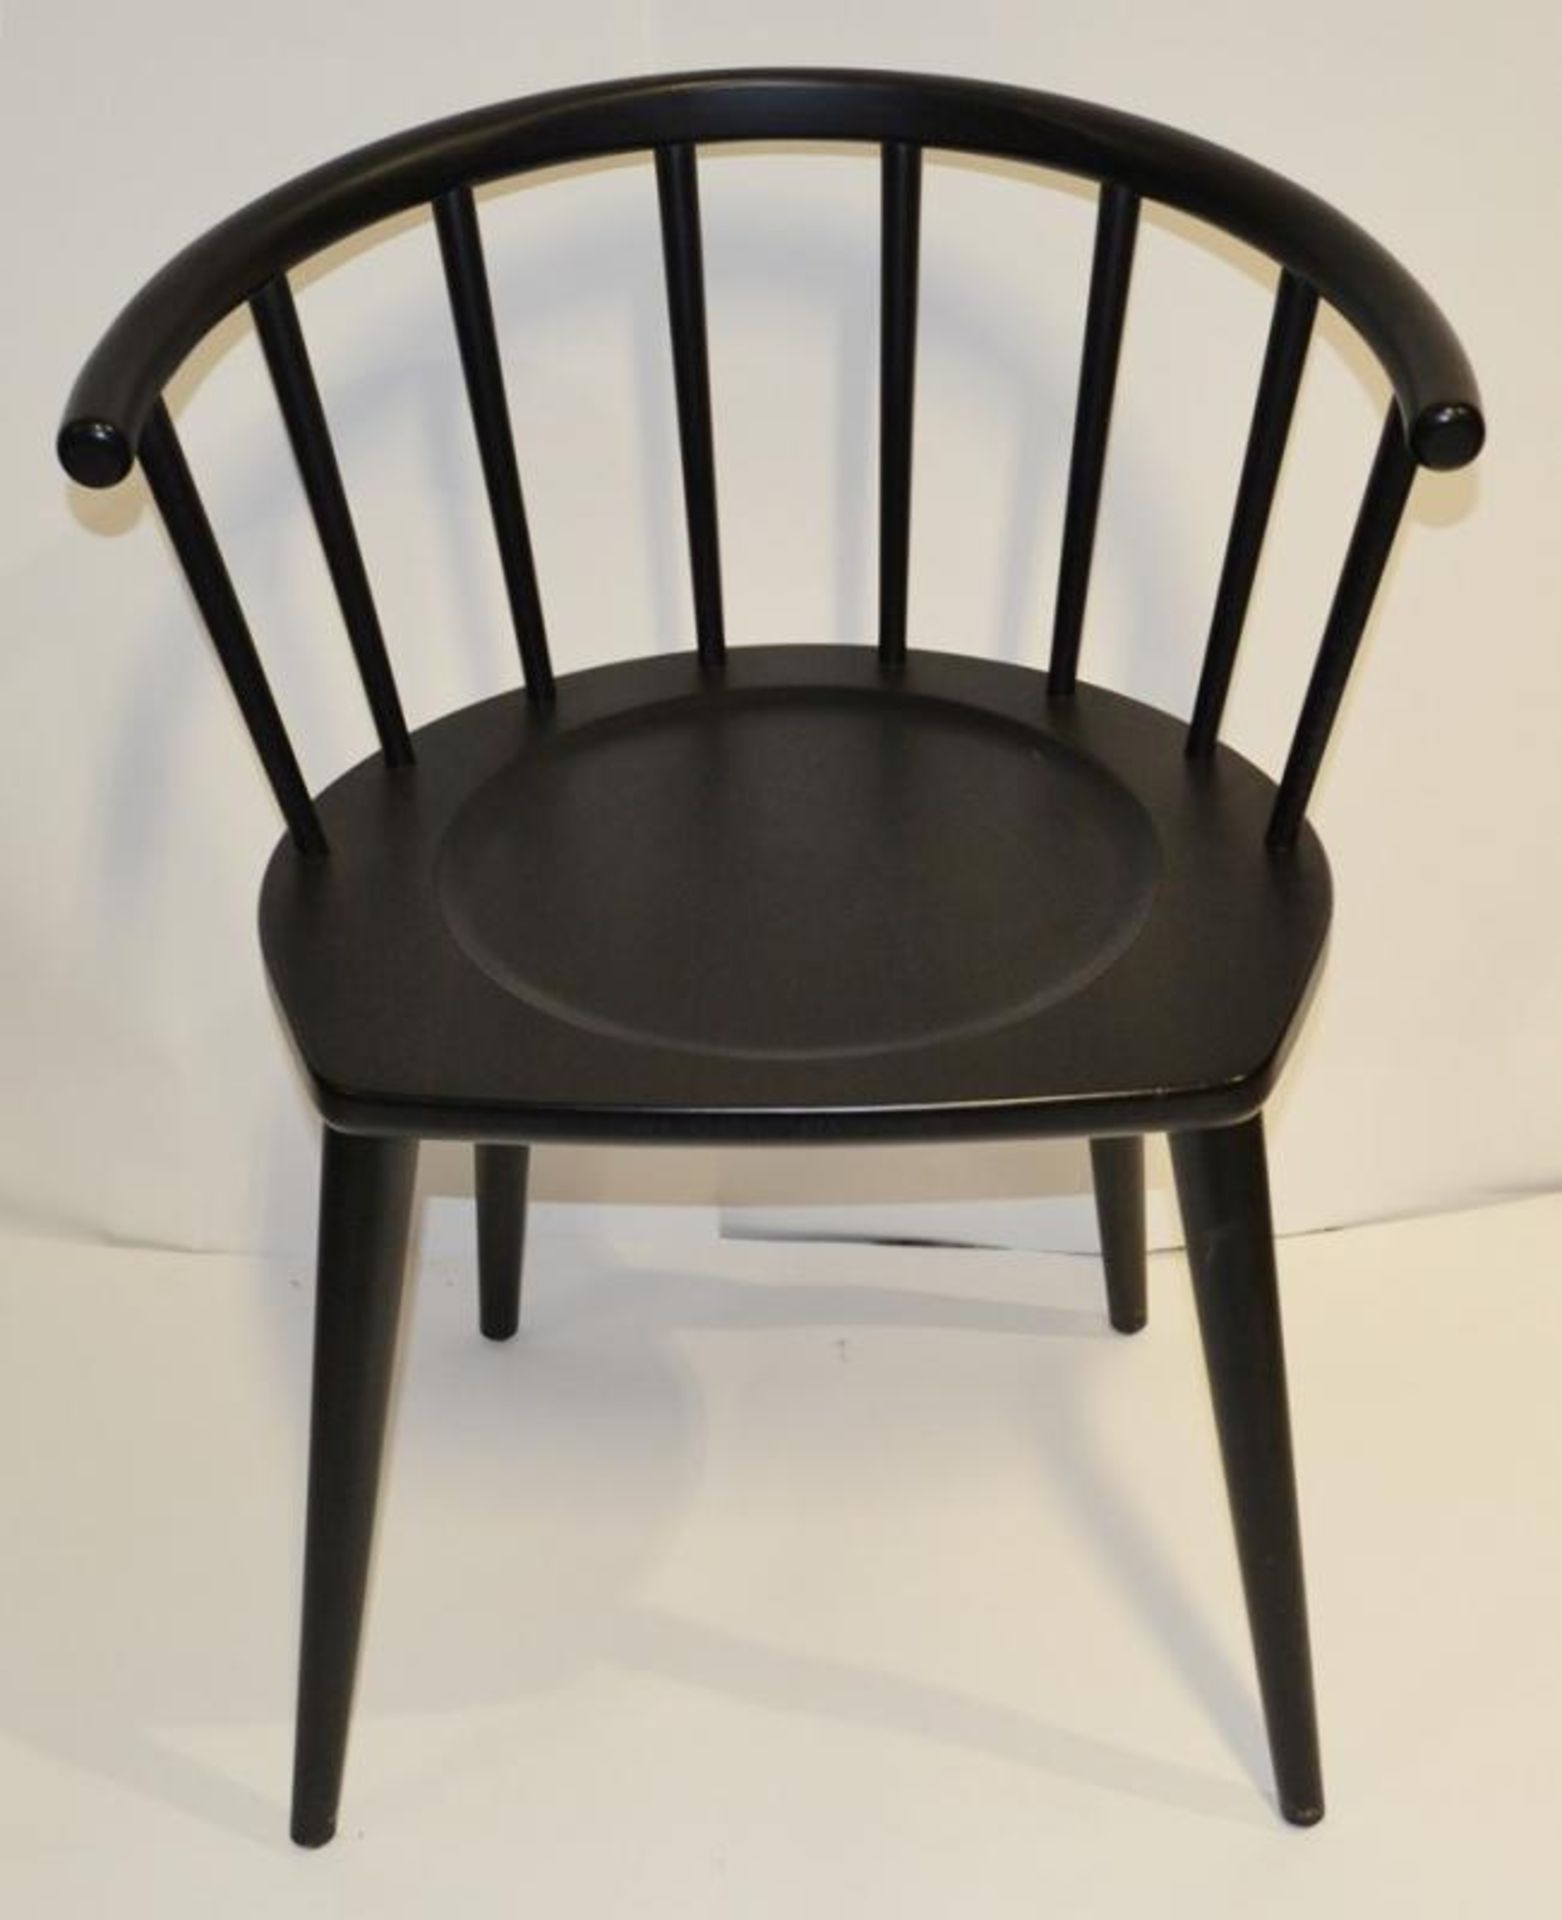 4 x Curved Spindleback Wooden Dining Chairs With Shaped Seats and Dark Finish - Dimensions: H73 x - Image 3 of 6